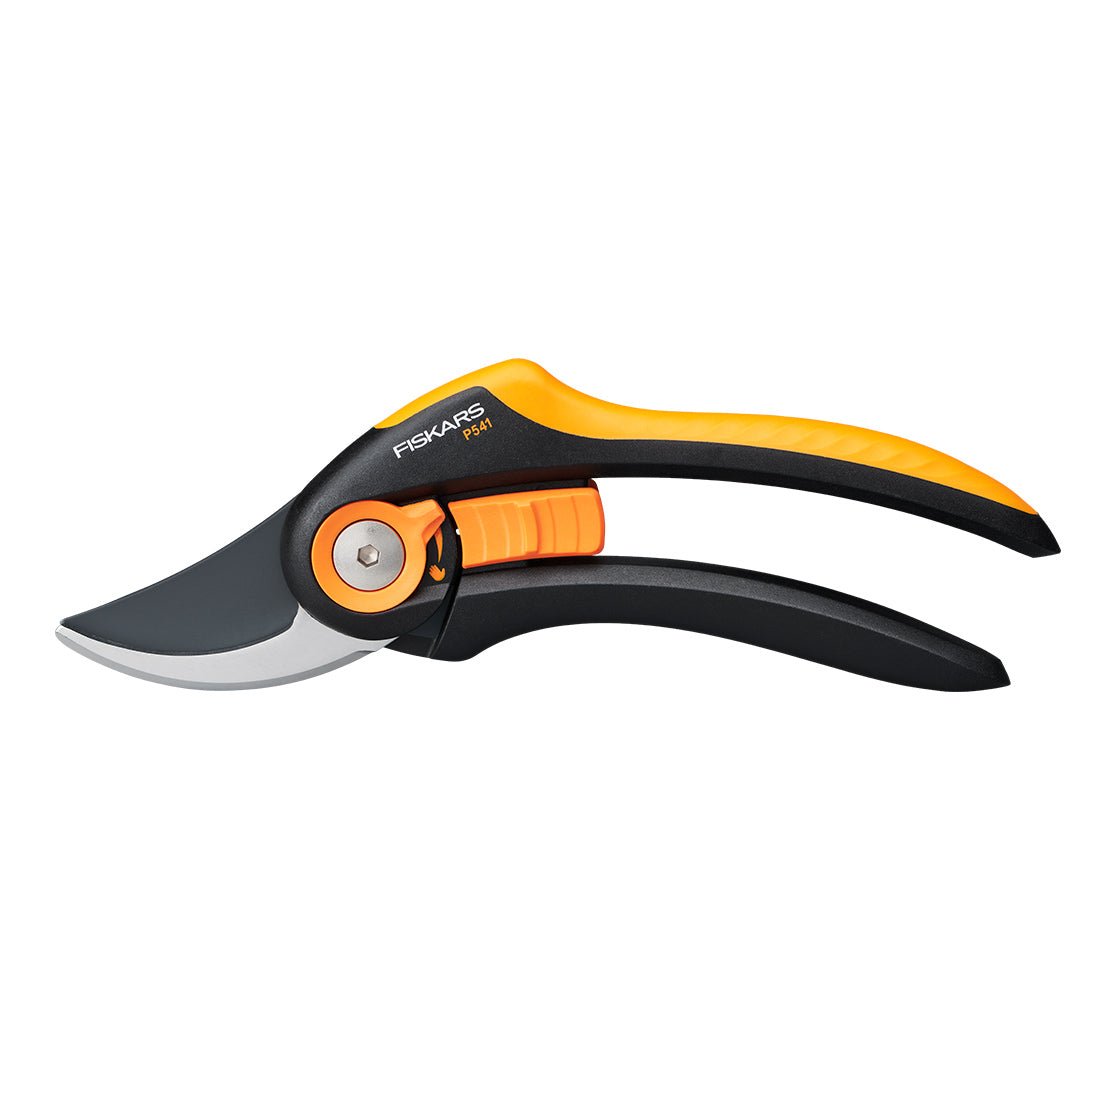 FISKARS P541 Plus™ Bypass Pruner up to 24mm 1057169 - Double Bay Hardware